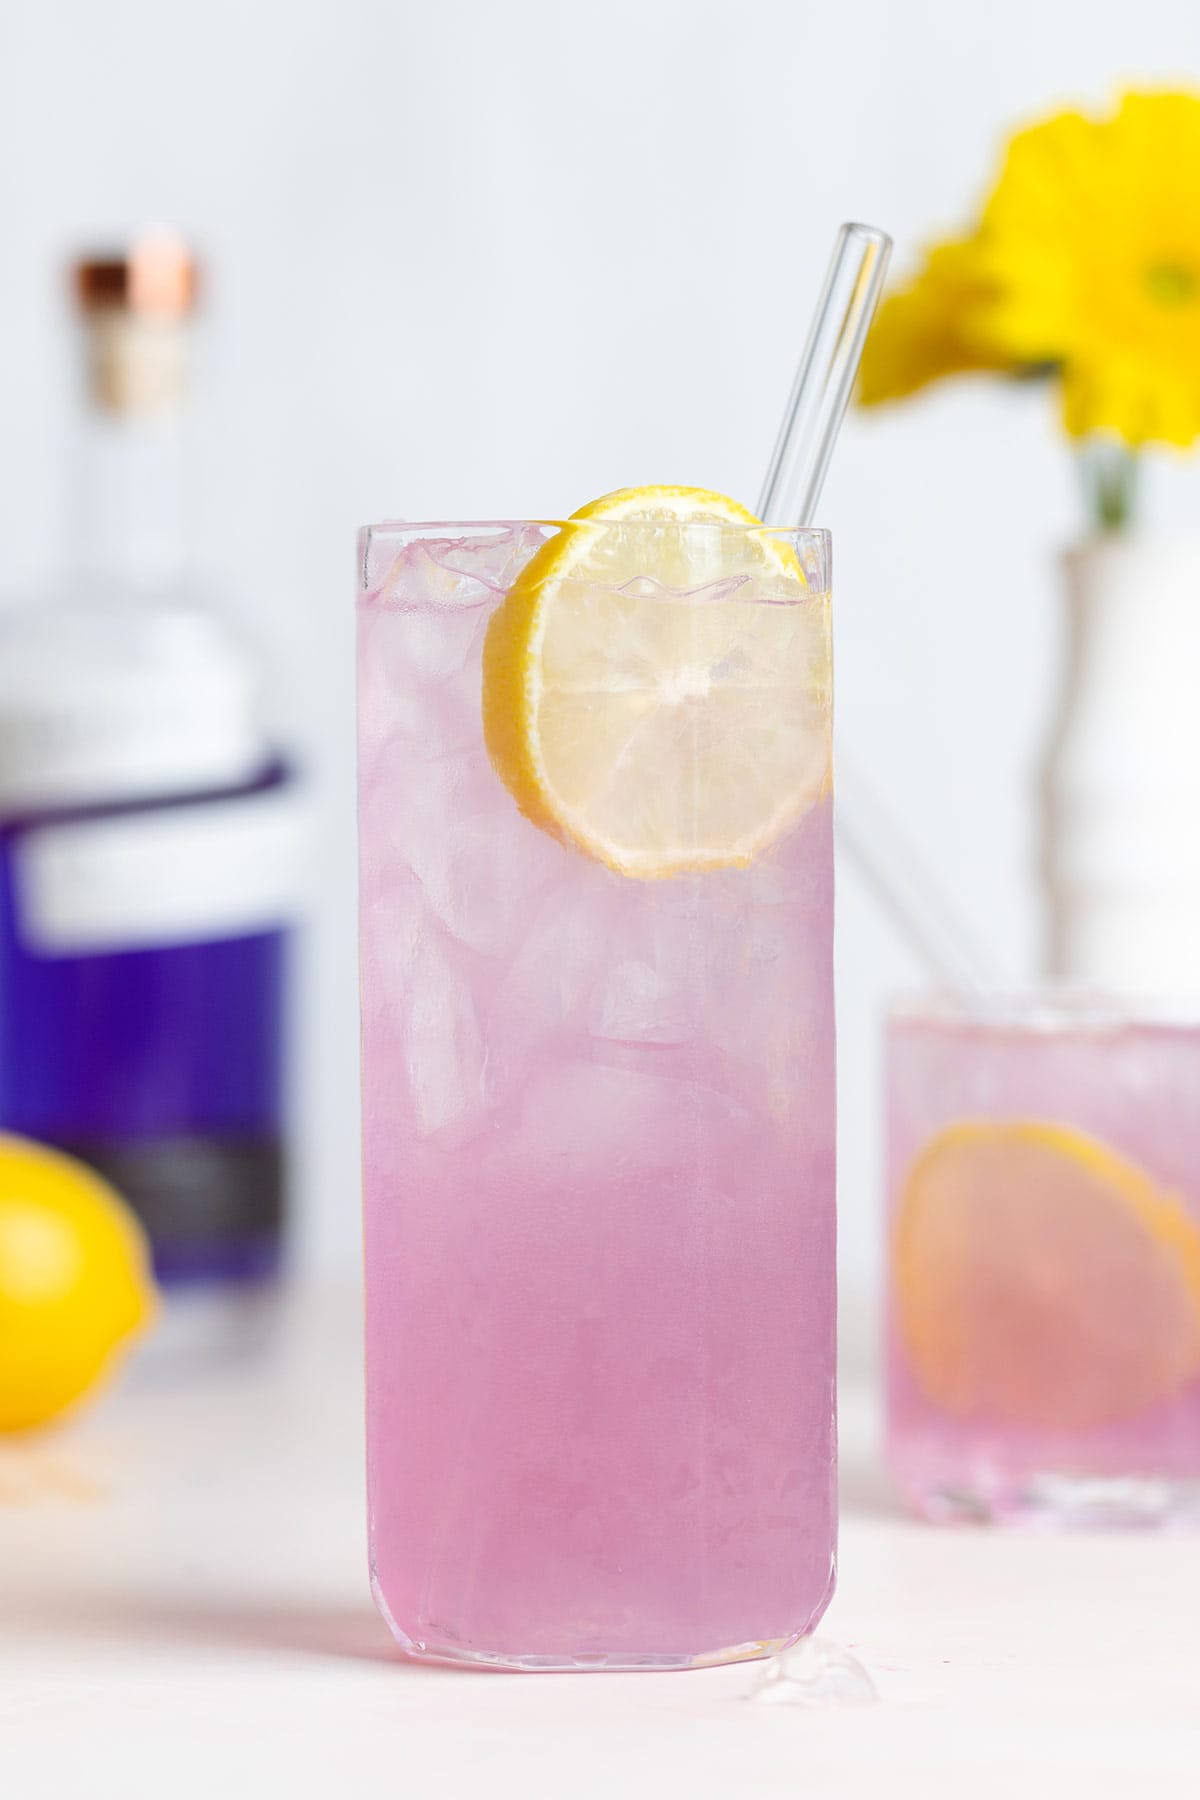 A light pink cocktail in a tall glass with ice garnished with a slice of lemon and a glass straw.